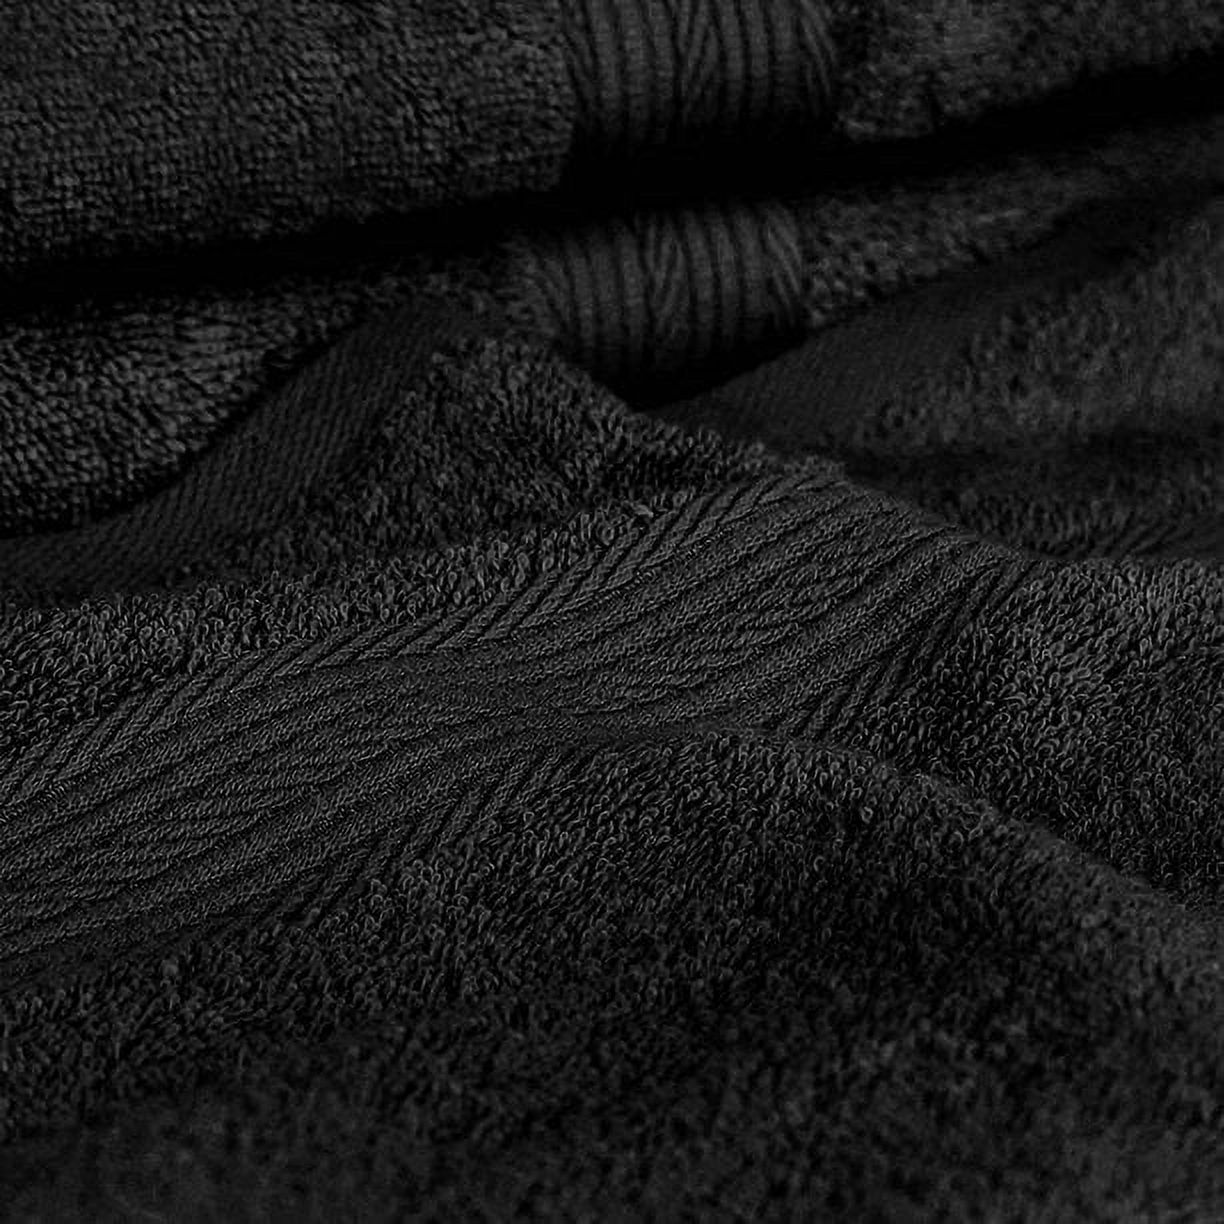 Beauty Threadz Ultra Soft 8 Piece Towel Set 500 GSM - 100% Pure Cotton, 2 Oversized Bath Towels 27x54, 2 Hand Towels 16x28, 4 Wash Cloths 13x13 - Ideal for Everyday use, Hotel & Spa- Black - image 4 of 7